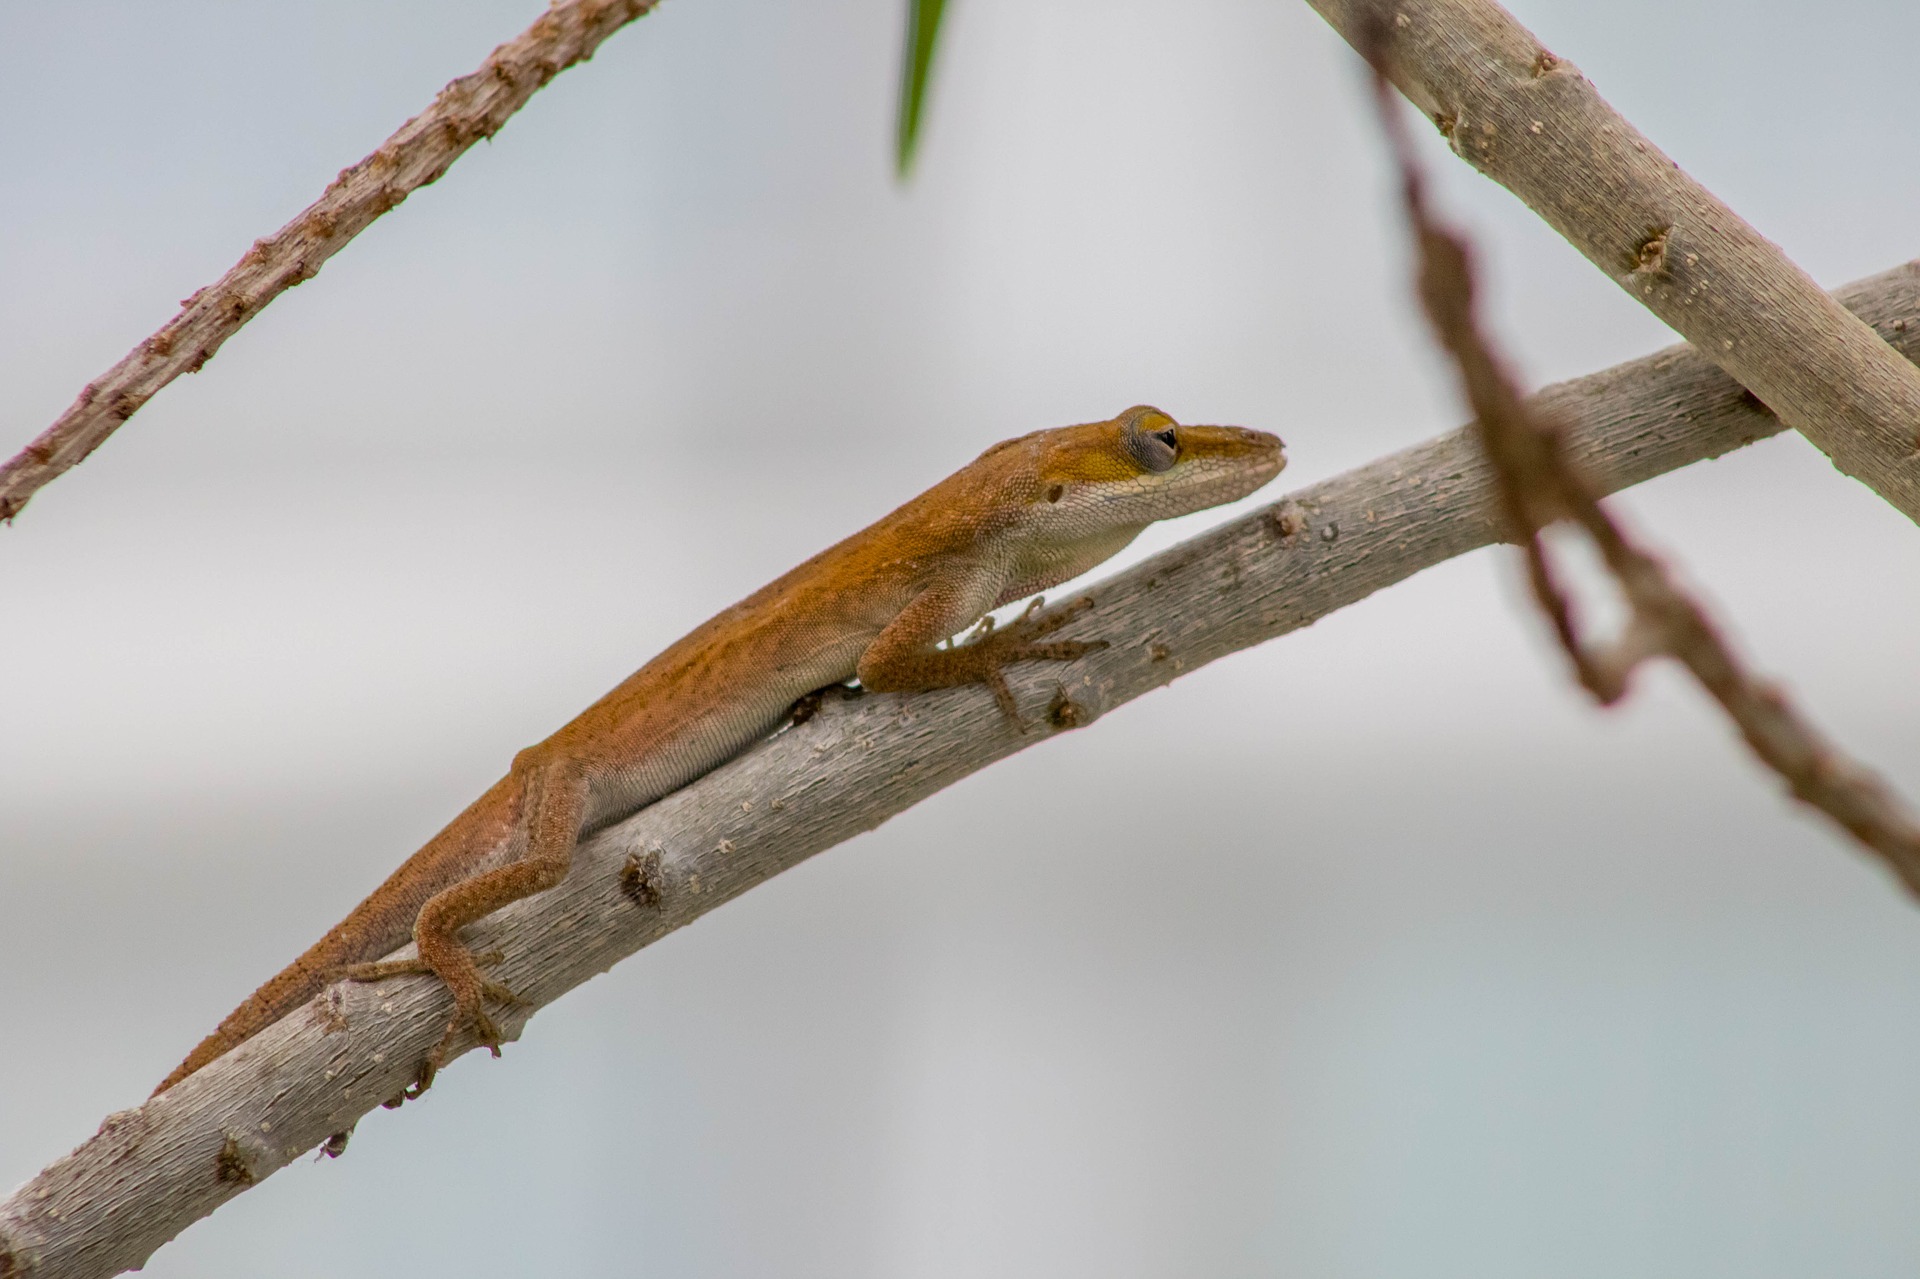 Small Brown Lizard by Katie Rose